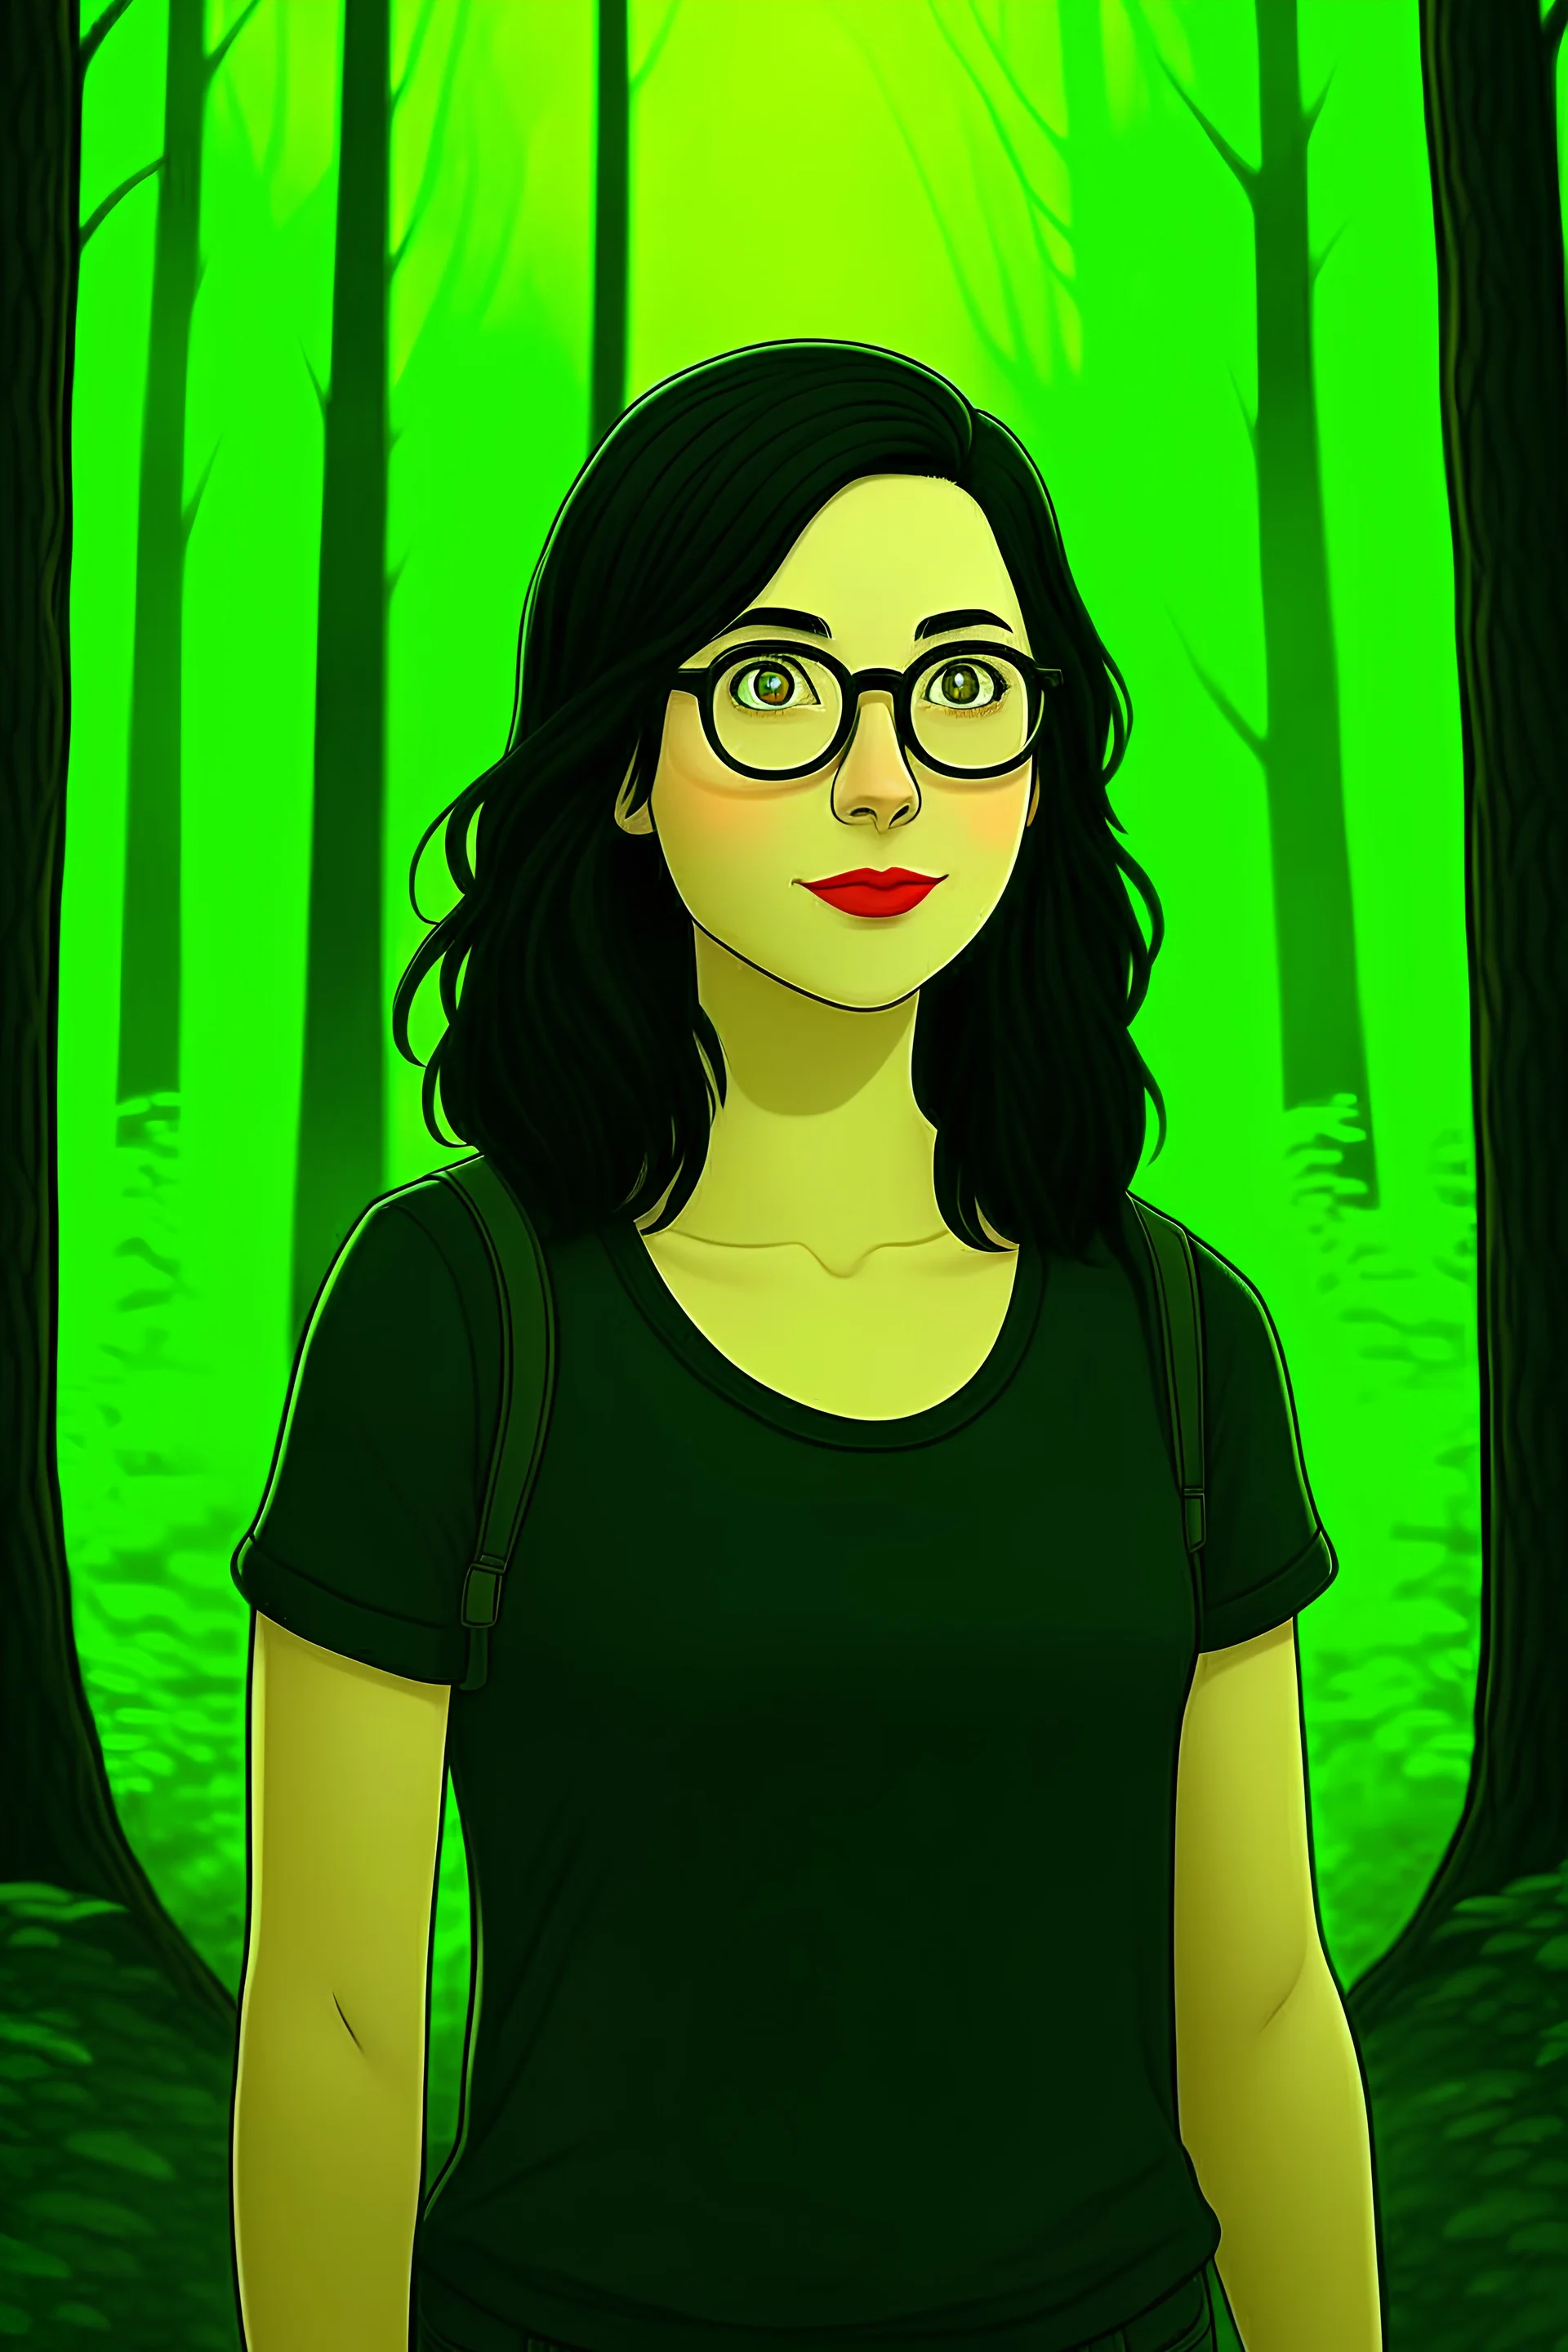 an illustration of a young woman with dark shoulder-length hair, fair skin, and green eyes. She wears glasses, and a black tshirt and jeans. She has round features. She is exploring a forest.